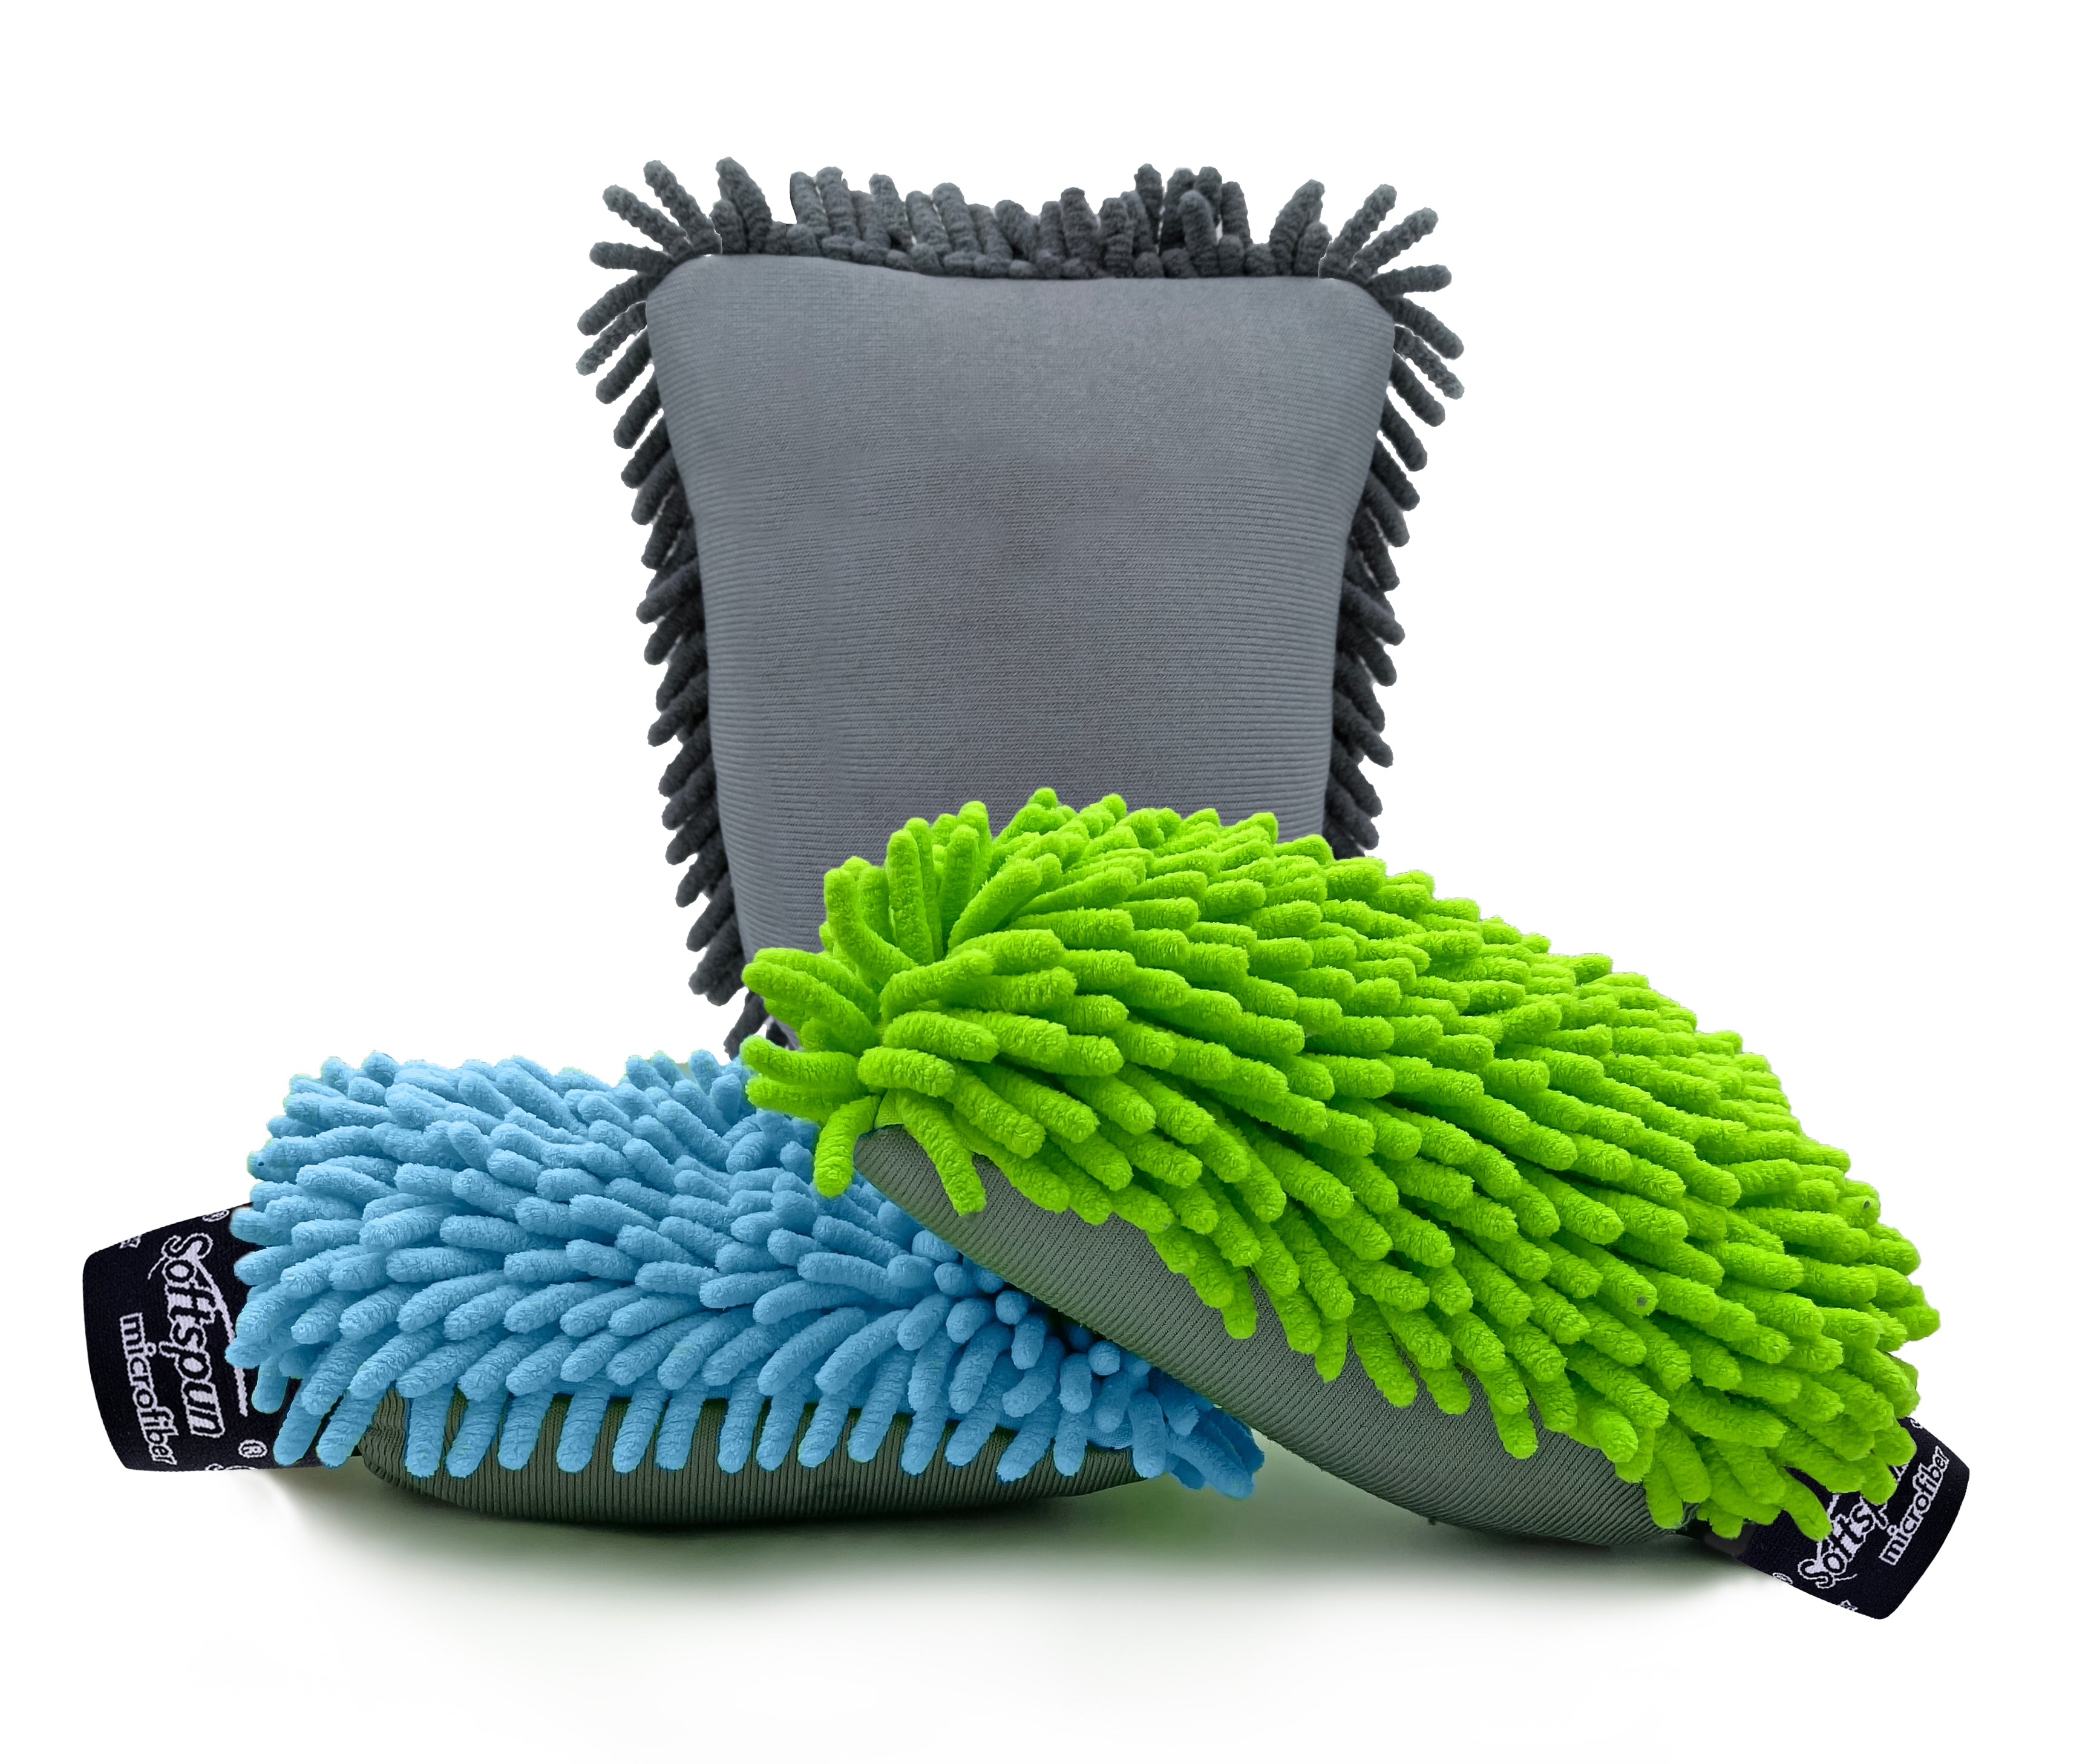 SOFTSPUN Microfiber Chenille & Glass Cloth Mitt, 3 Piece Combo 1700 GSM , Multi-Purpose Super Absorbent and Perfect Wash Clean with Lint-Scratch Free Home, Kitchen, Window, Dusting!